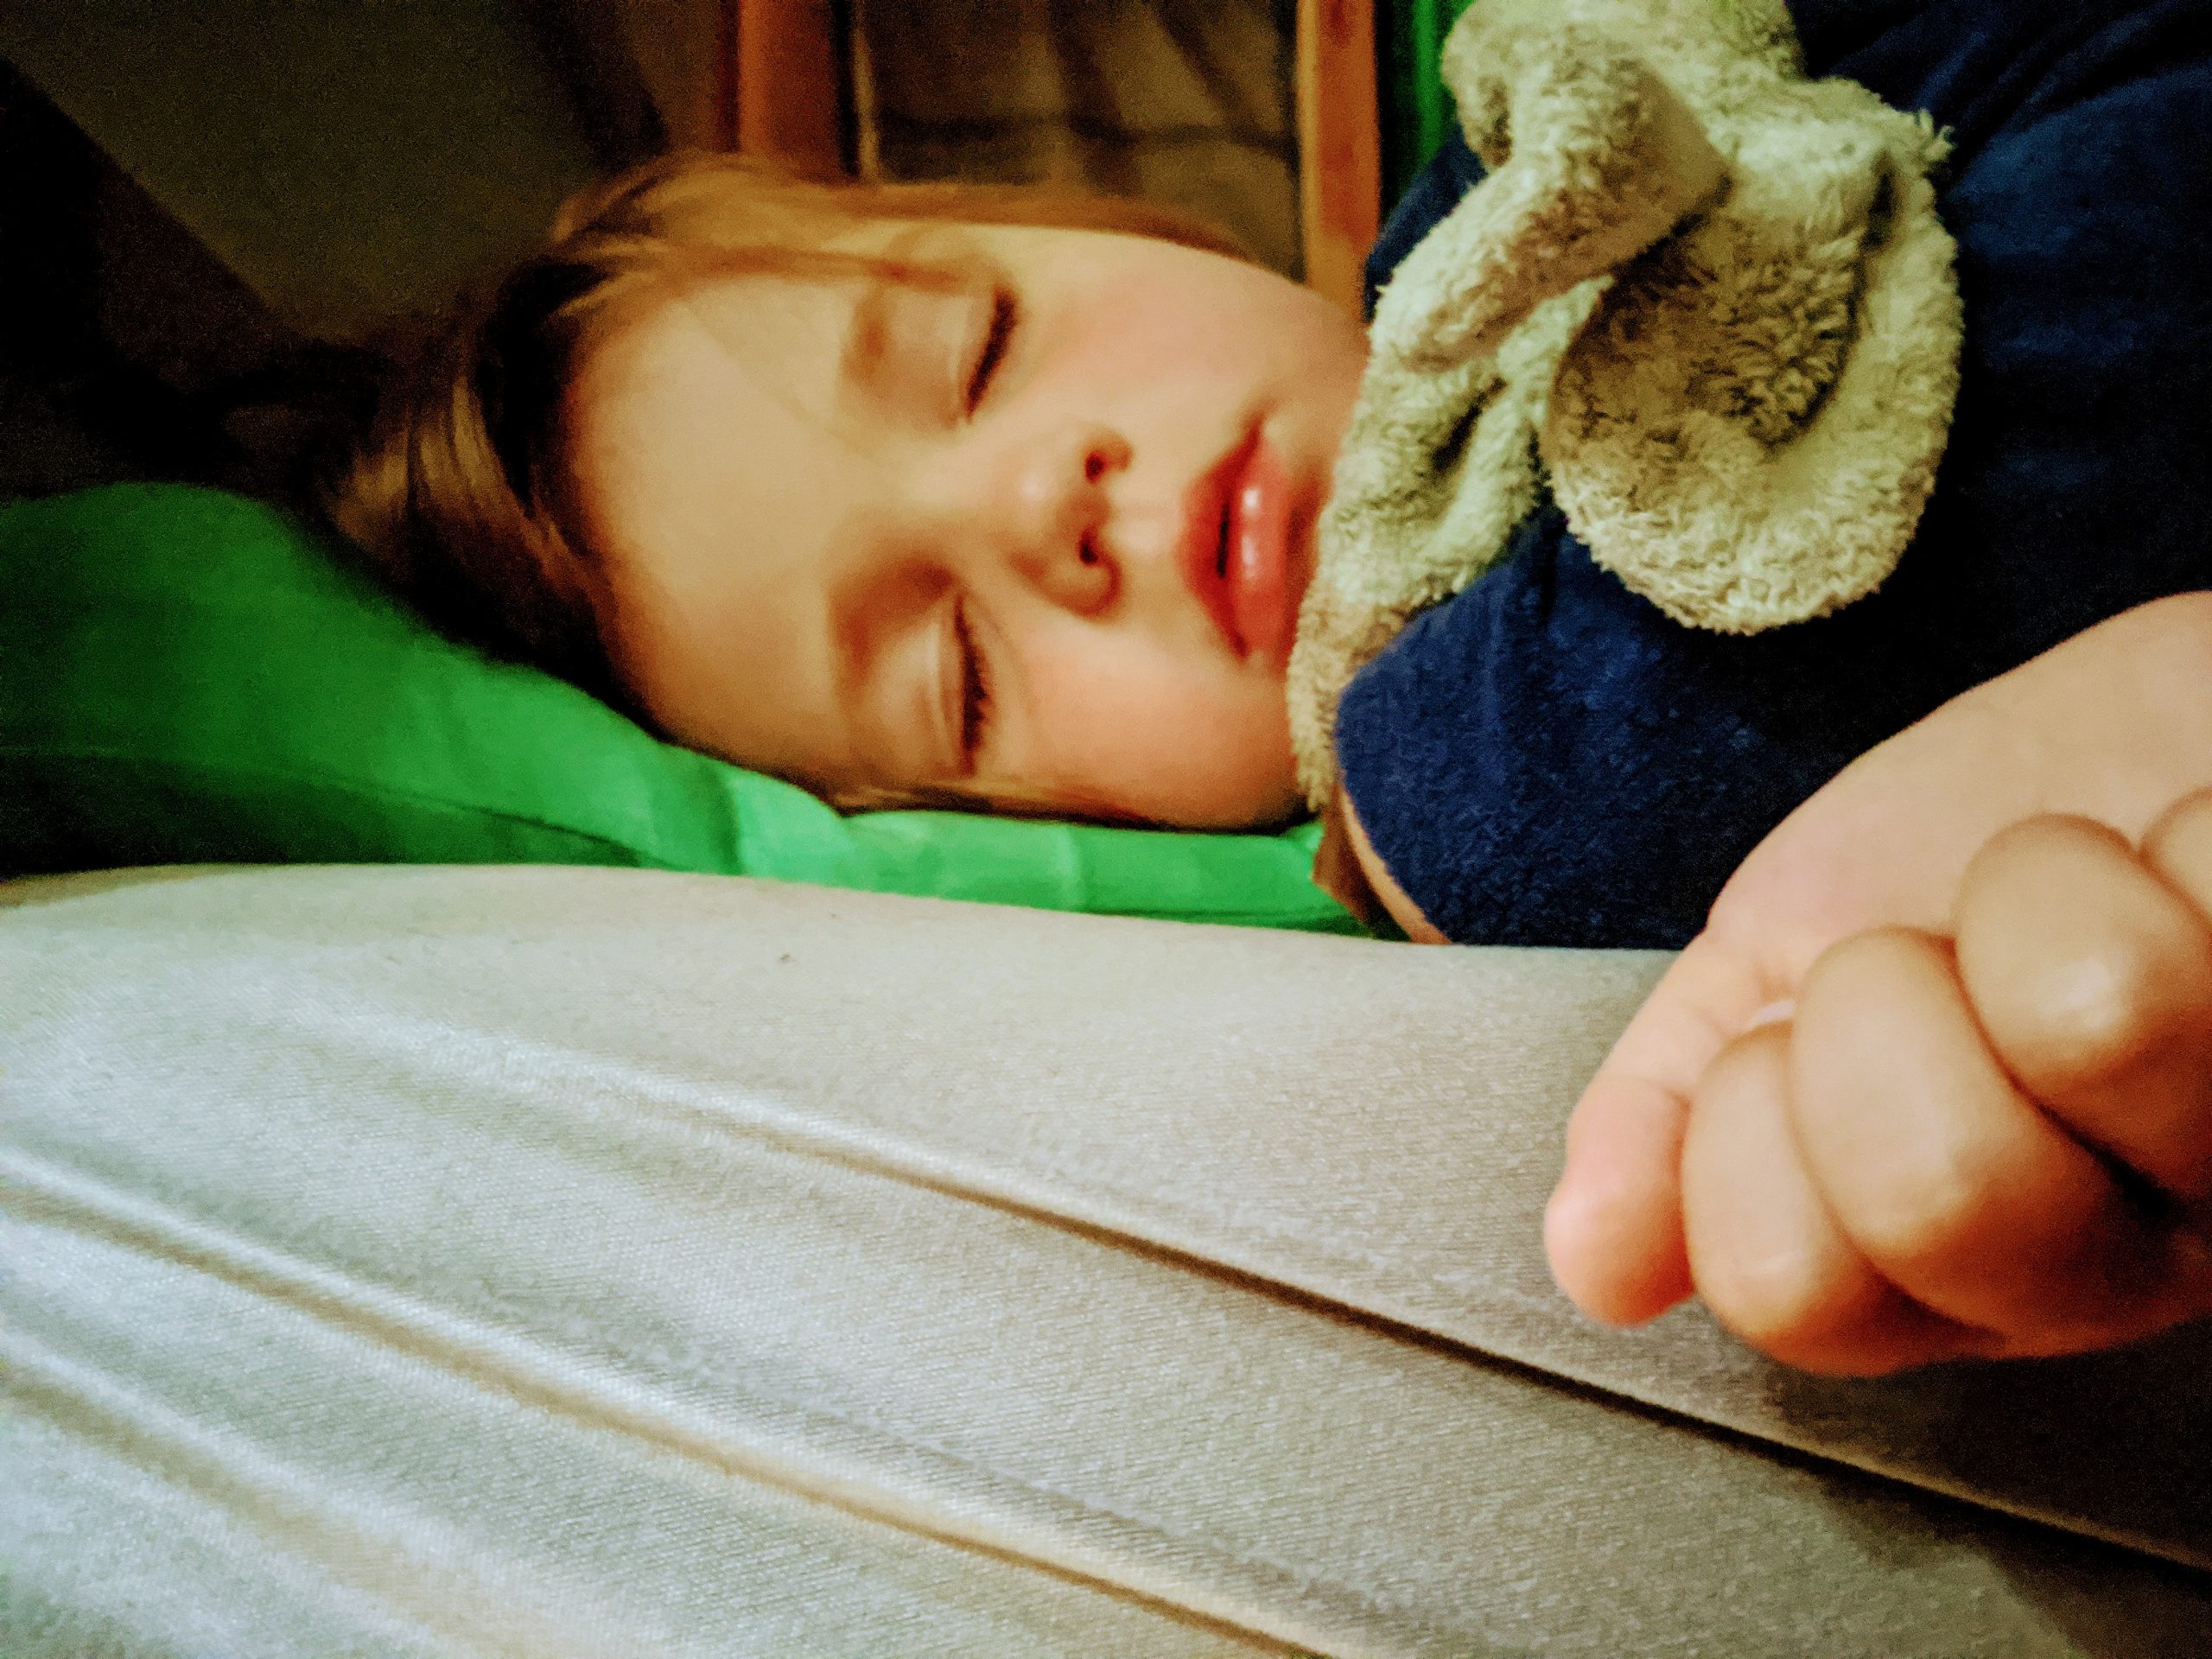 Child sleeping peacefully - a moment of tenderness